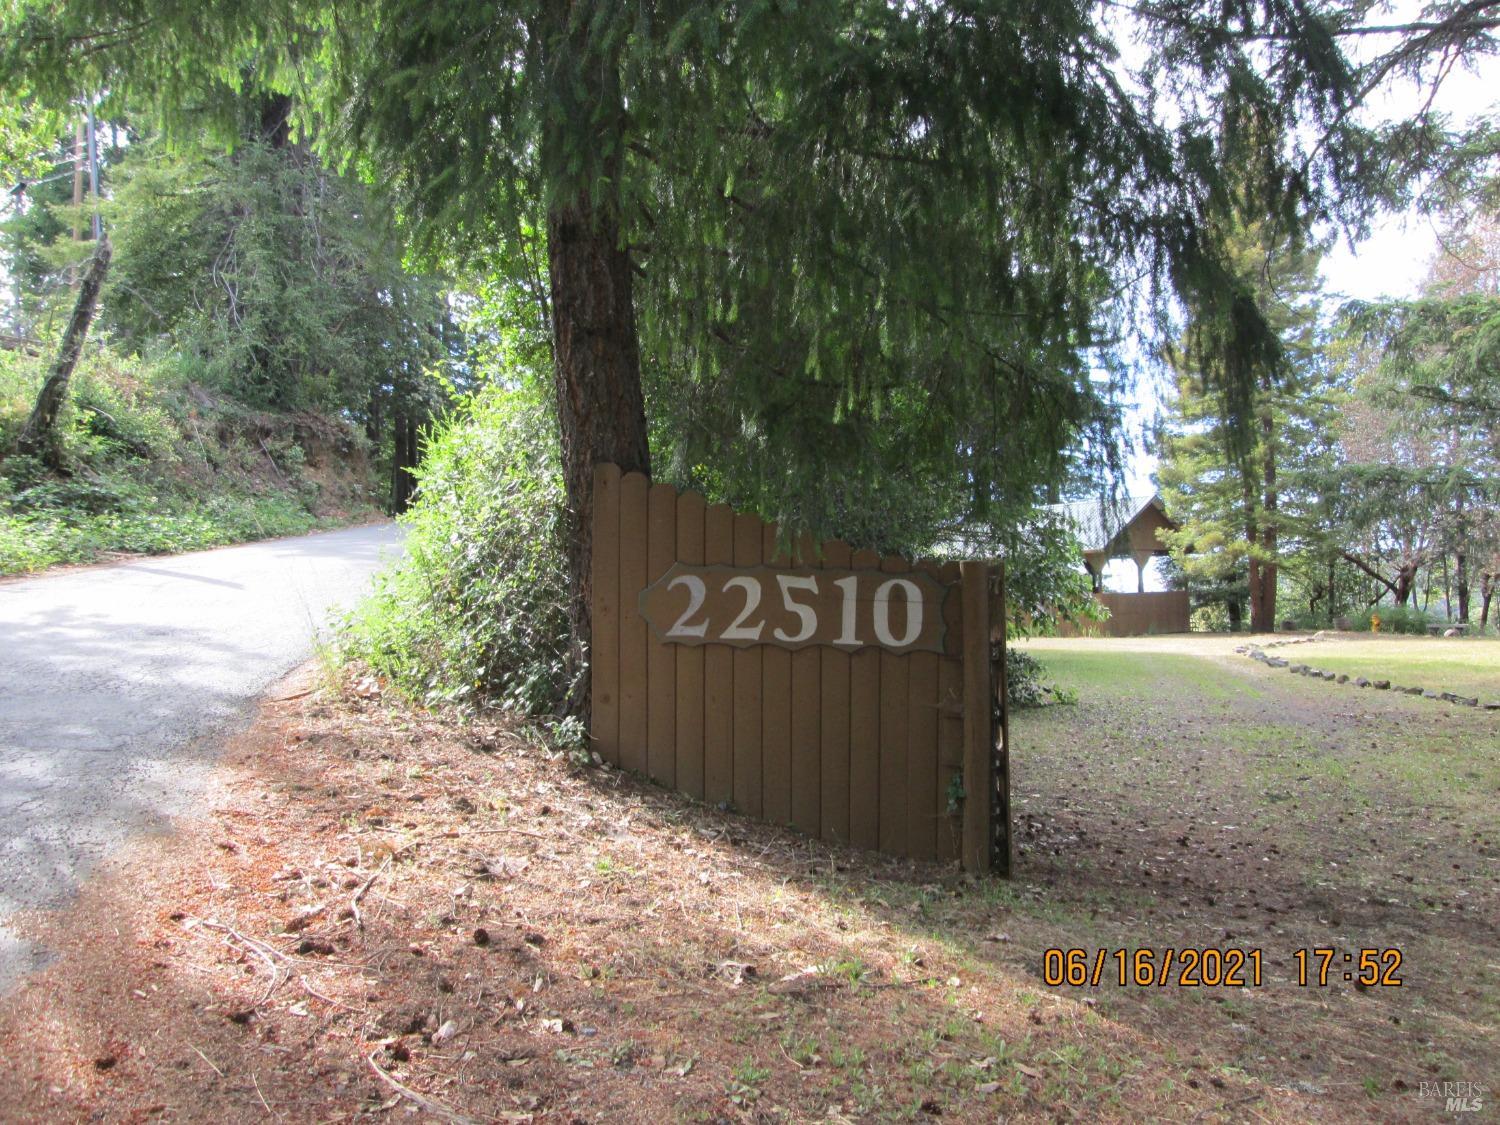 Photo of Fort Ross Rd in Cazadero, CA